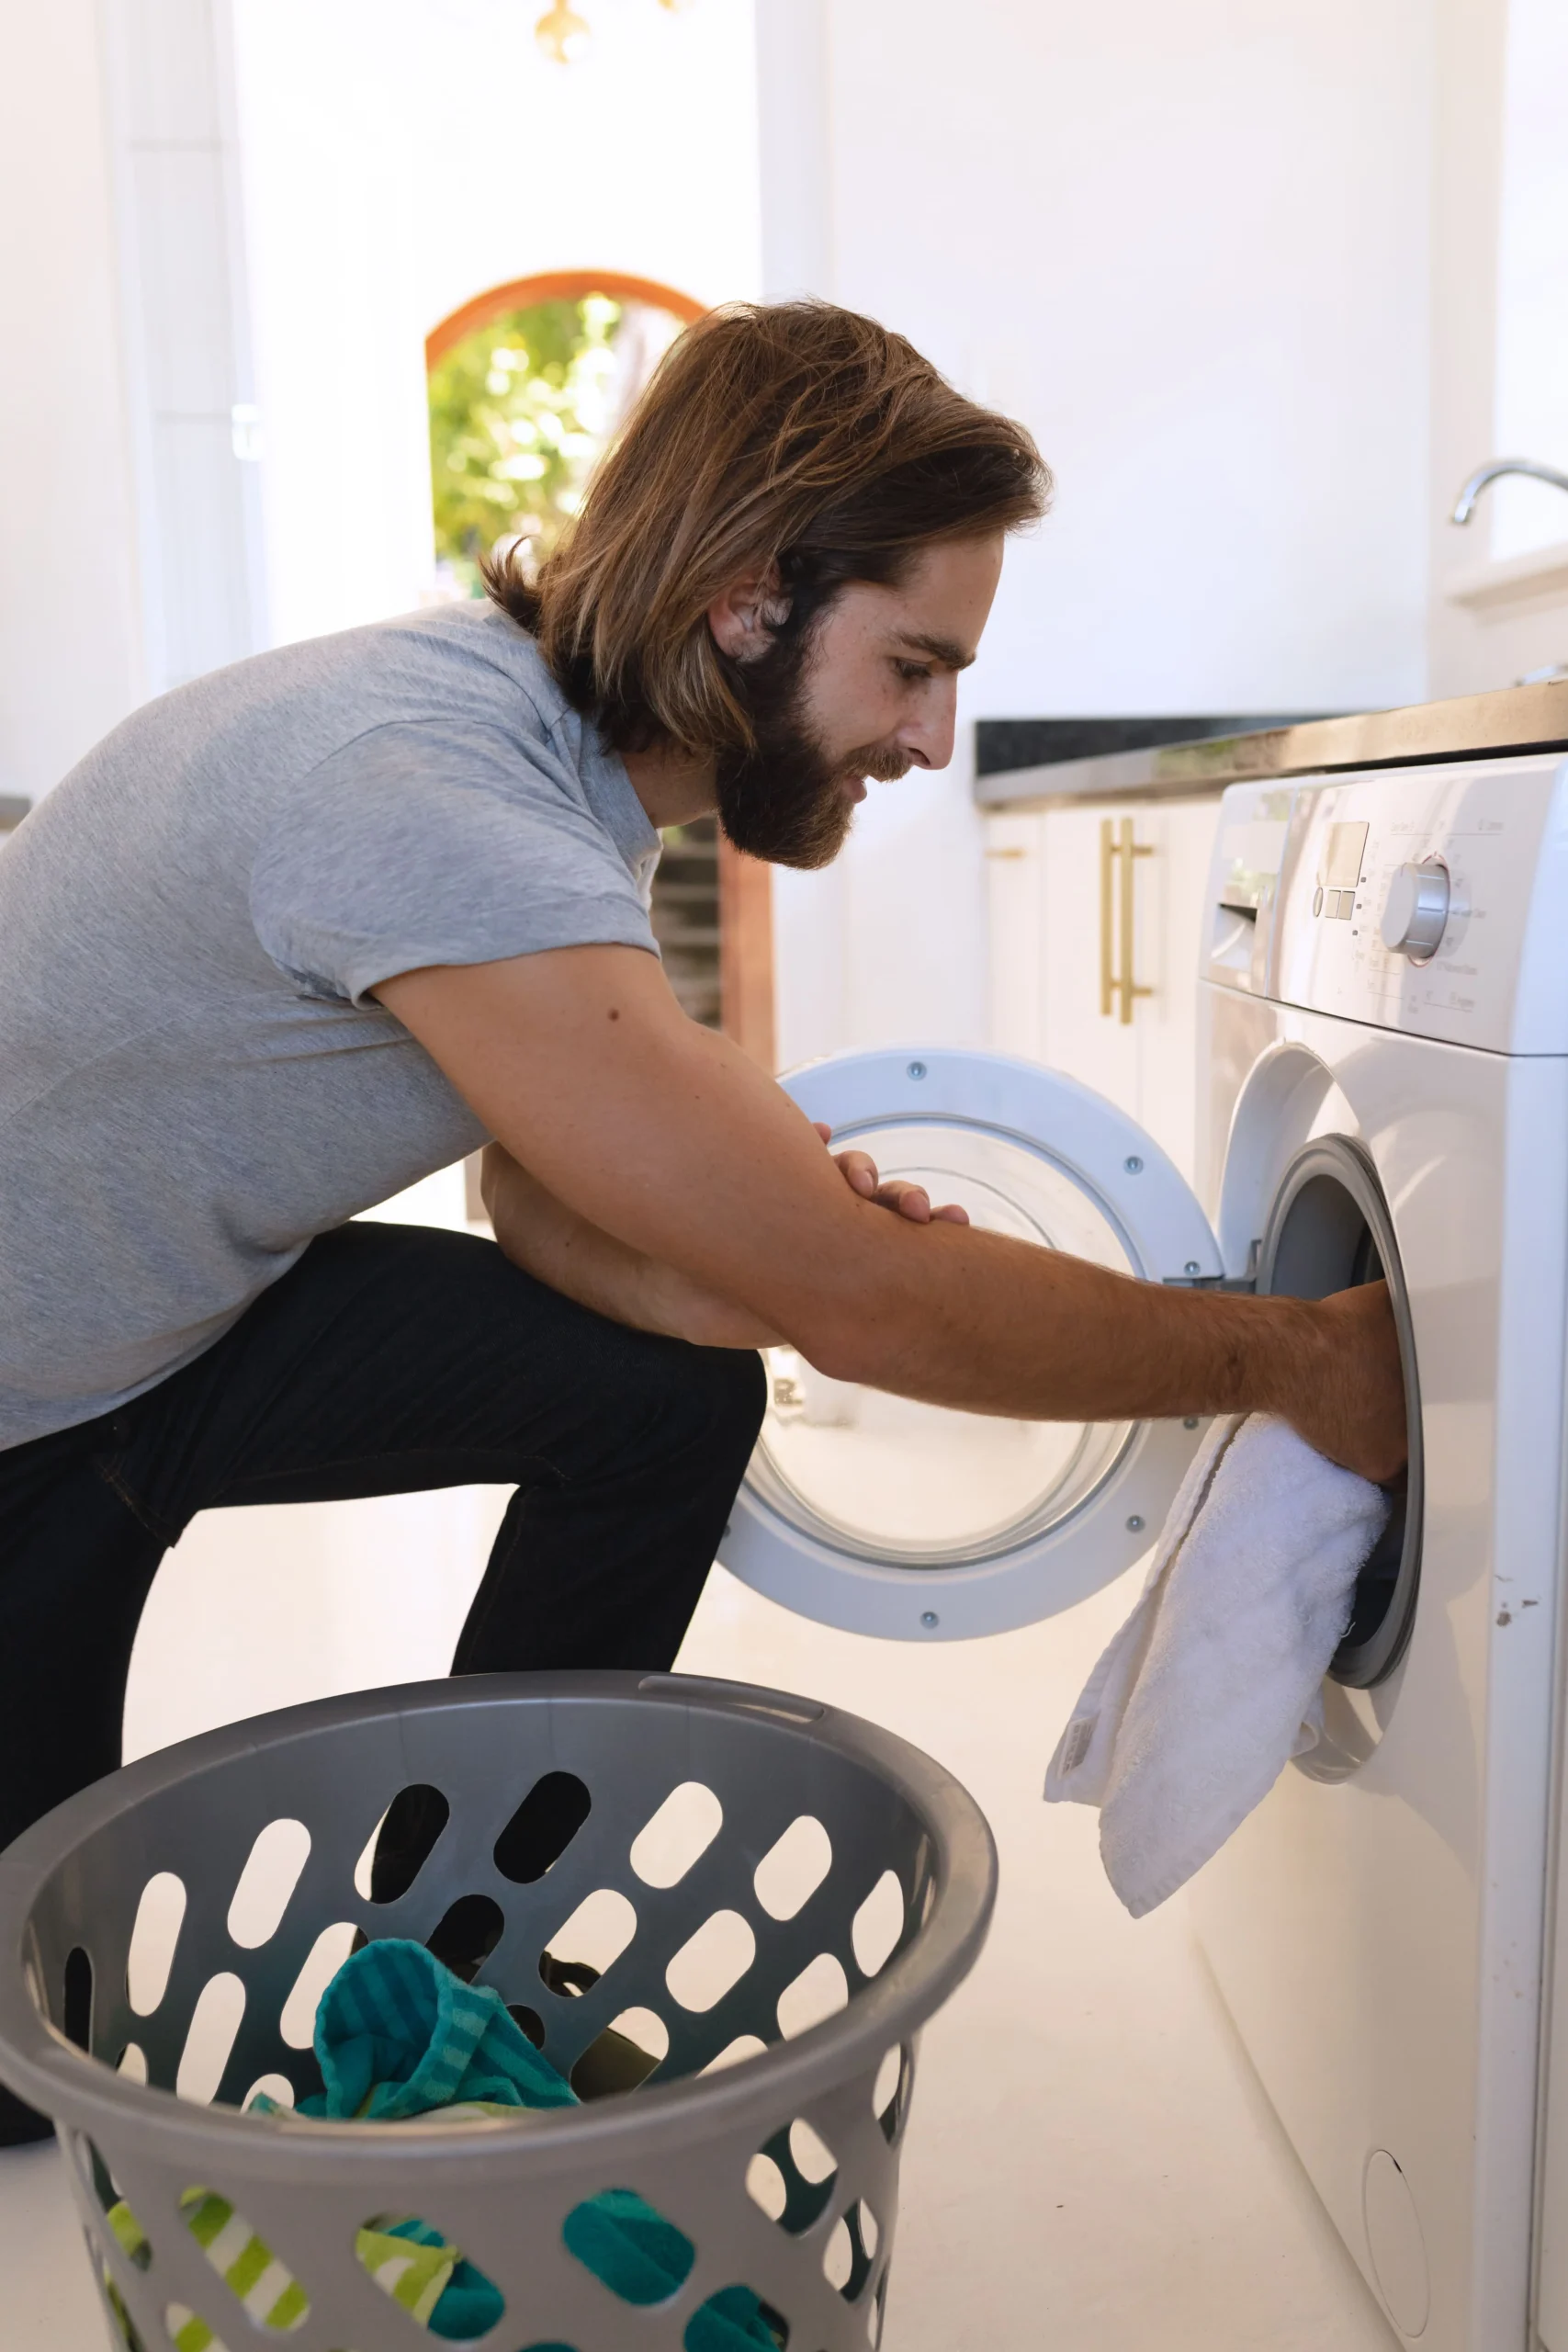 laundry and dry cleaning services